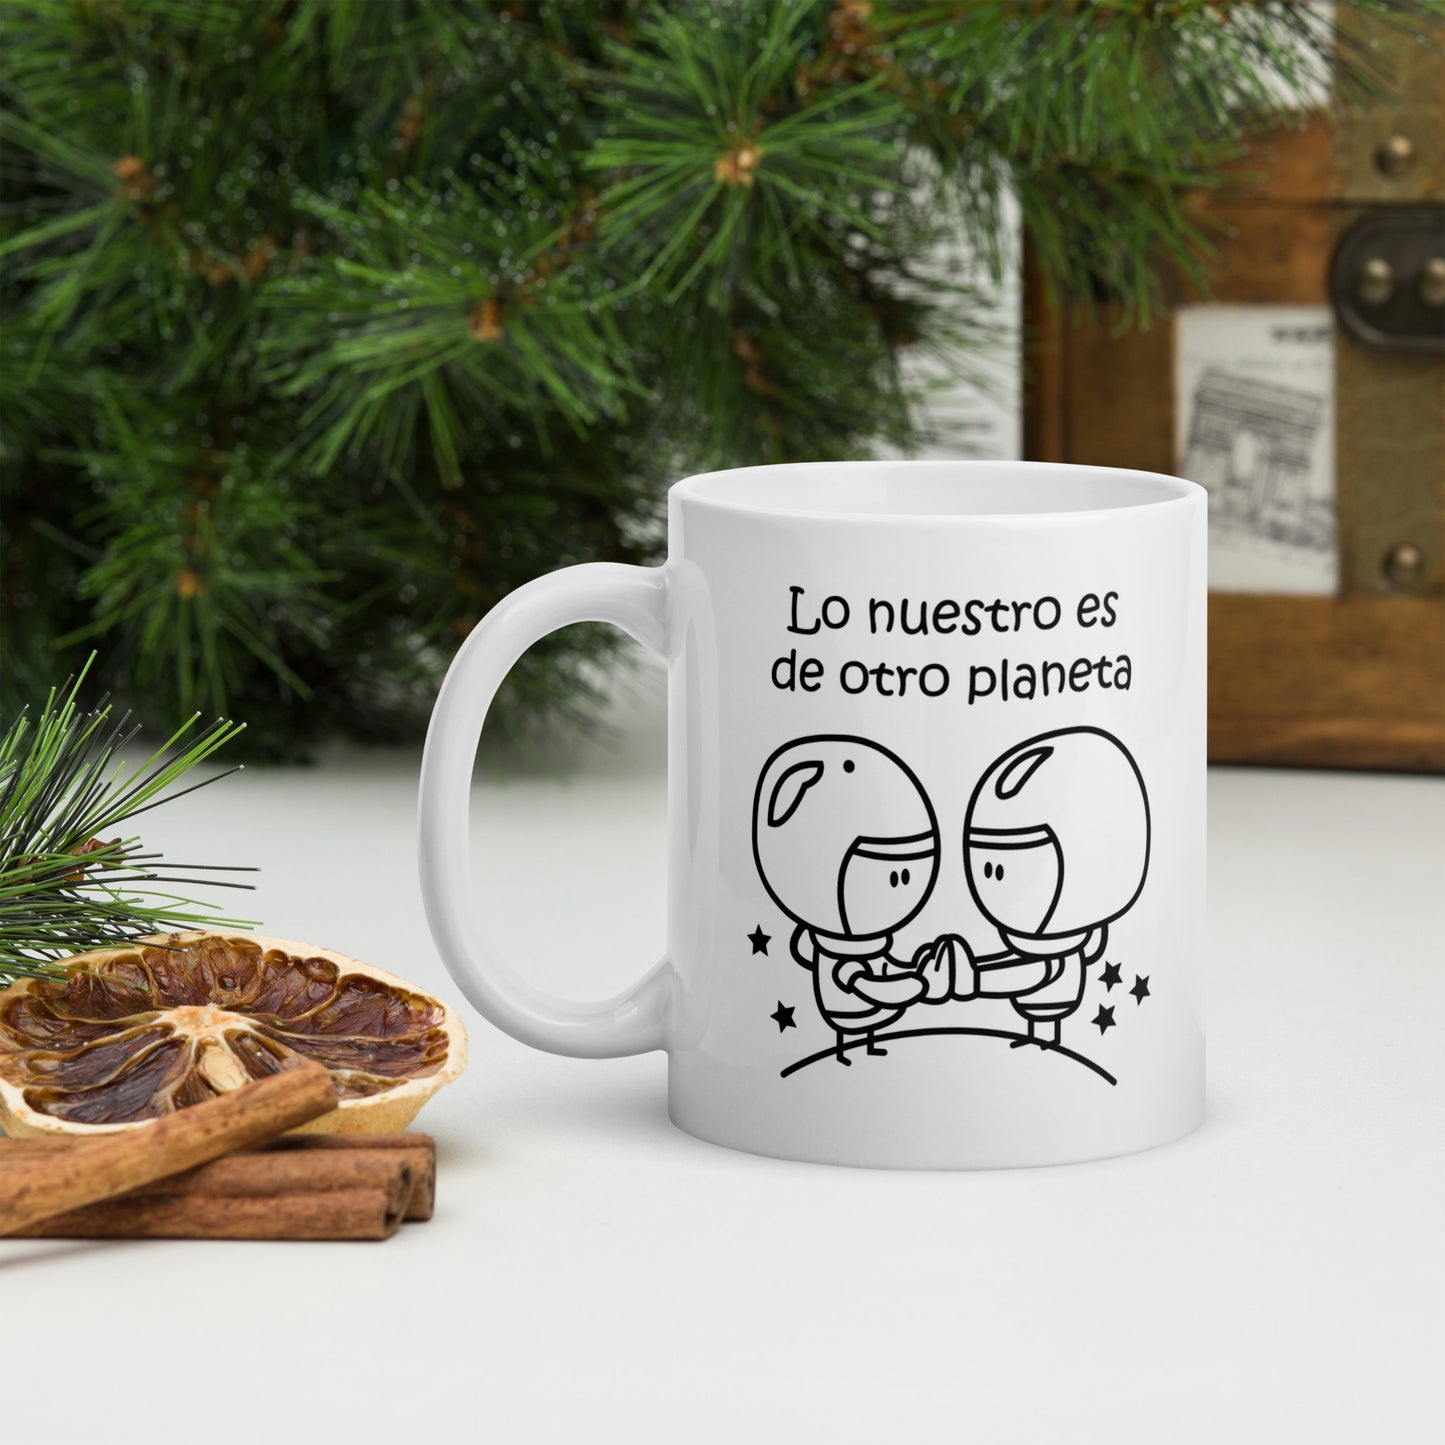 Ours Is From Another Planet Mug